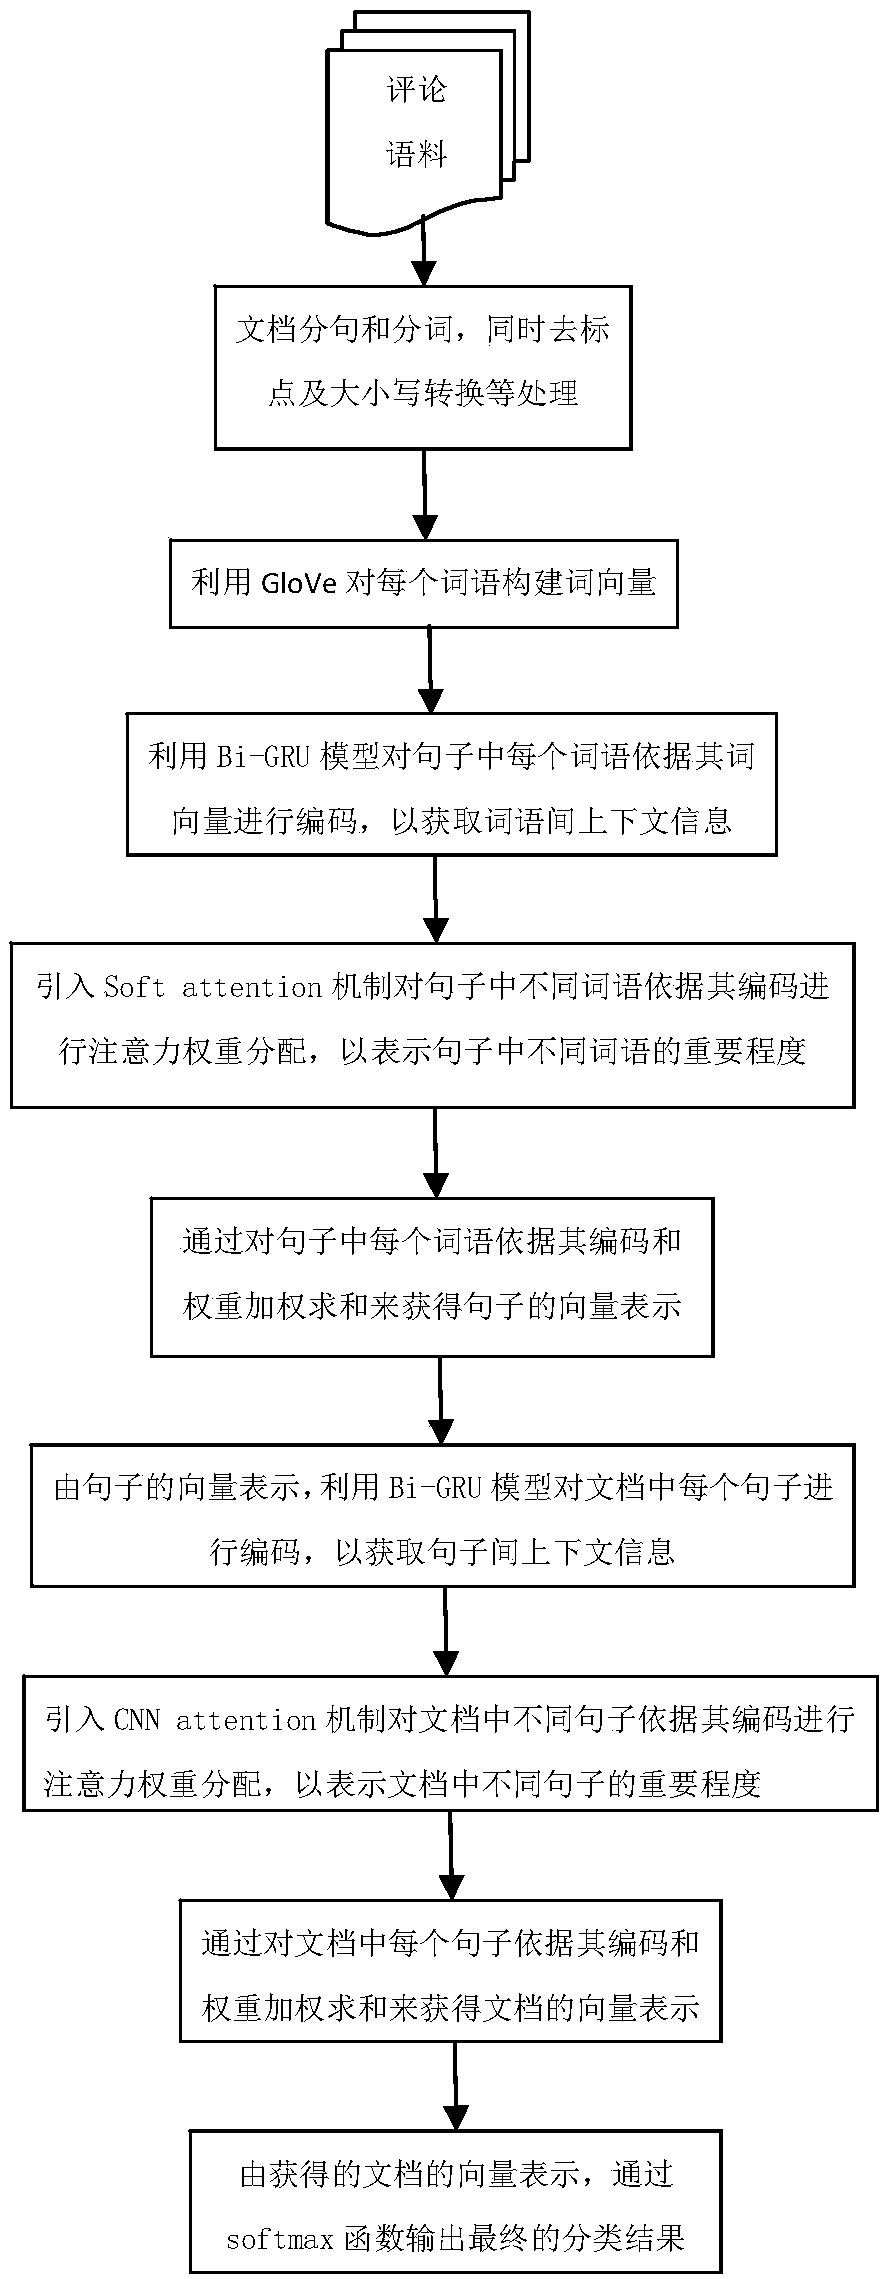 Document classification method based on hierarchical multi-attention network